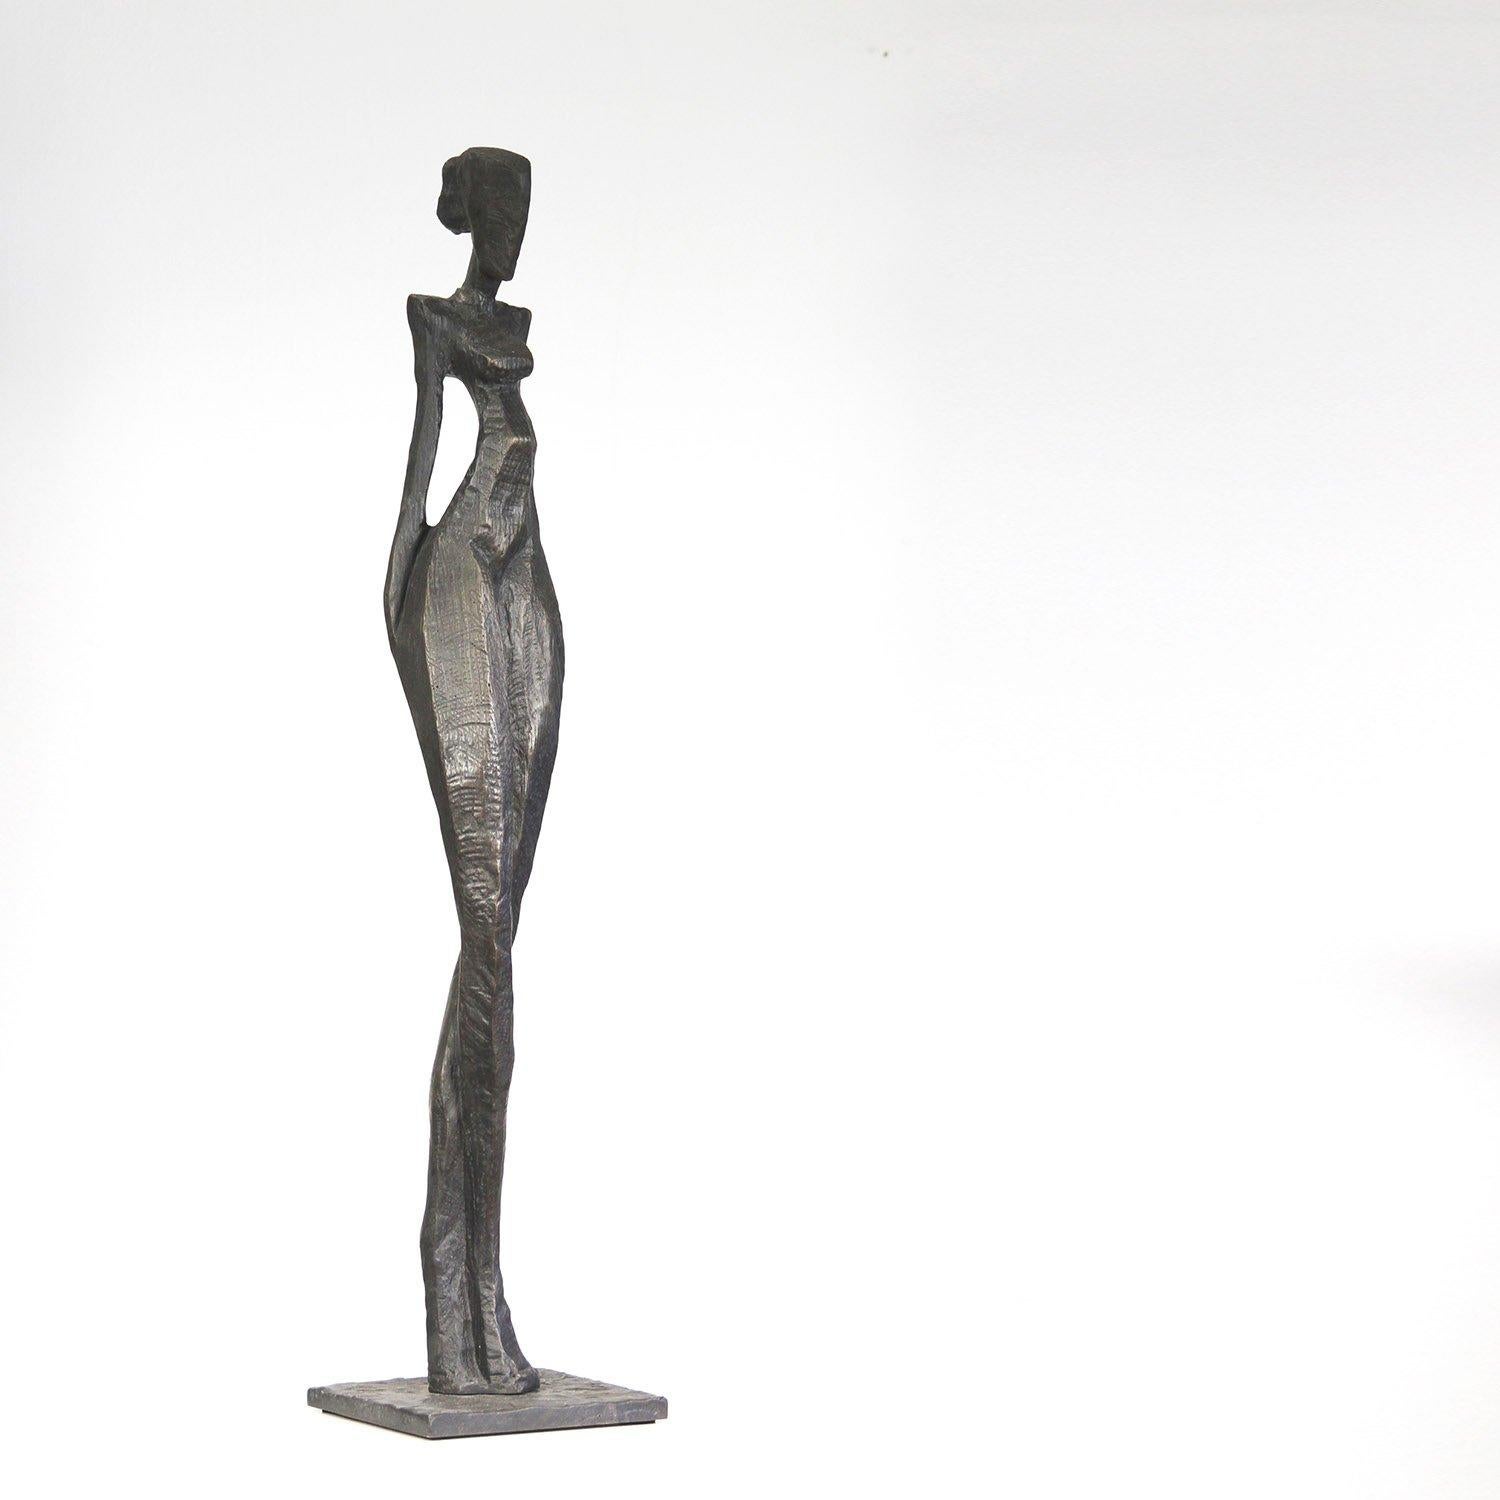 Evi is an elegant figurative bronze sculpture by Nando Kallweit.

Nando carved the marque for the body from a piece of oak using a small chain saw. The marque is then used to make the cavity for a sand and clay cast bronze. The figure therefore